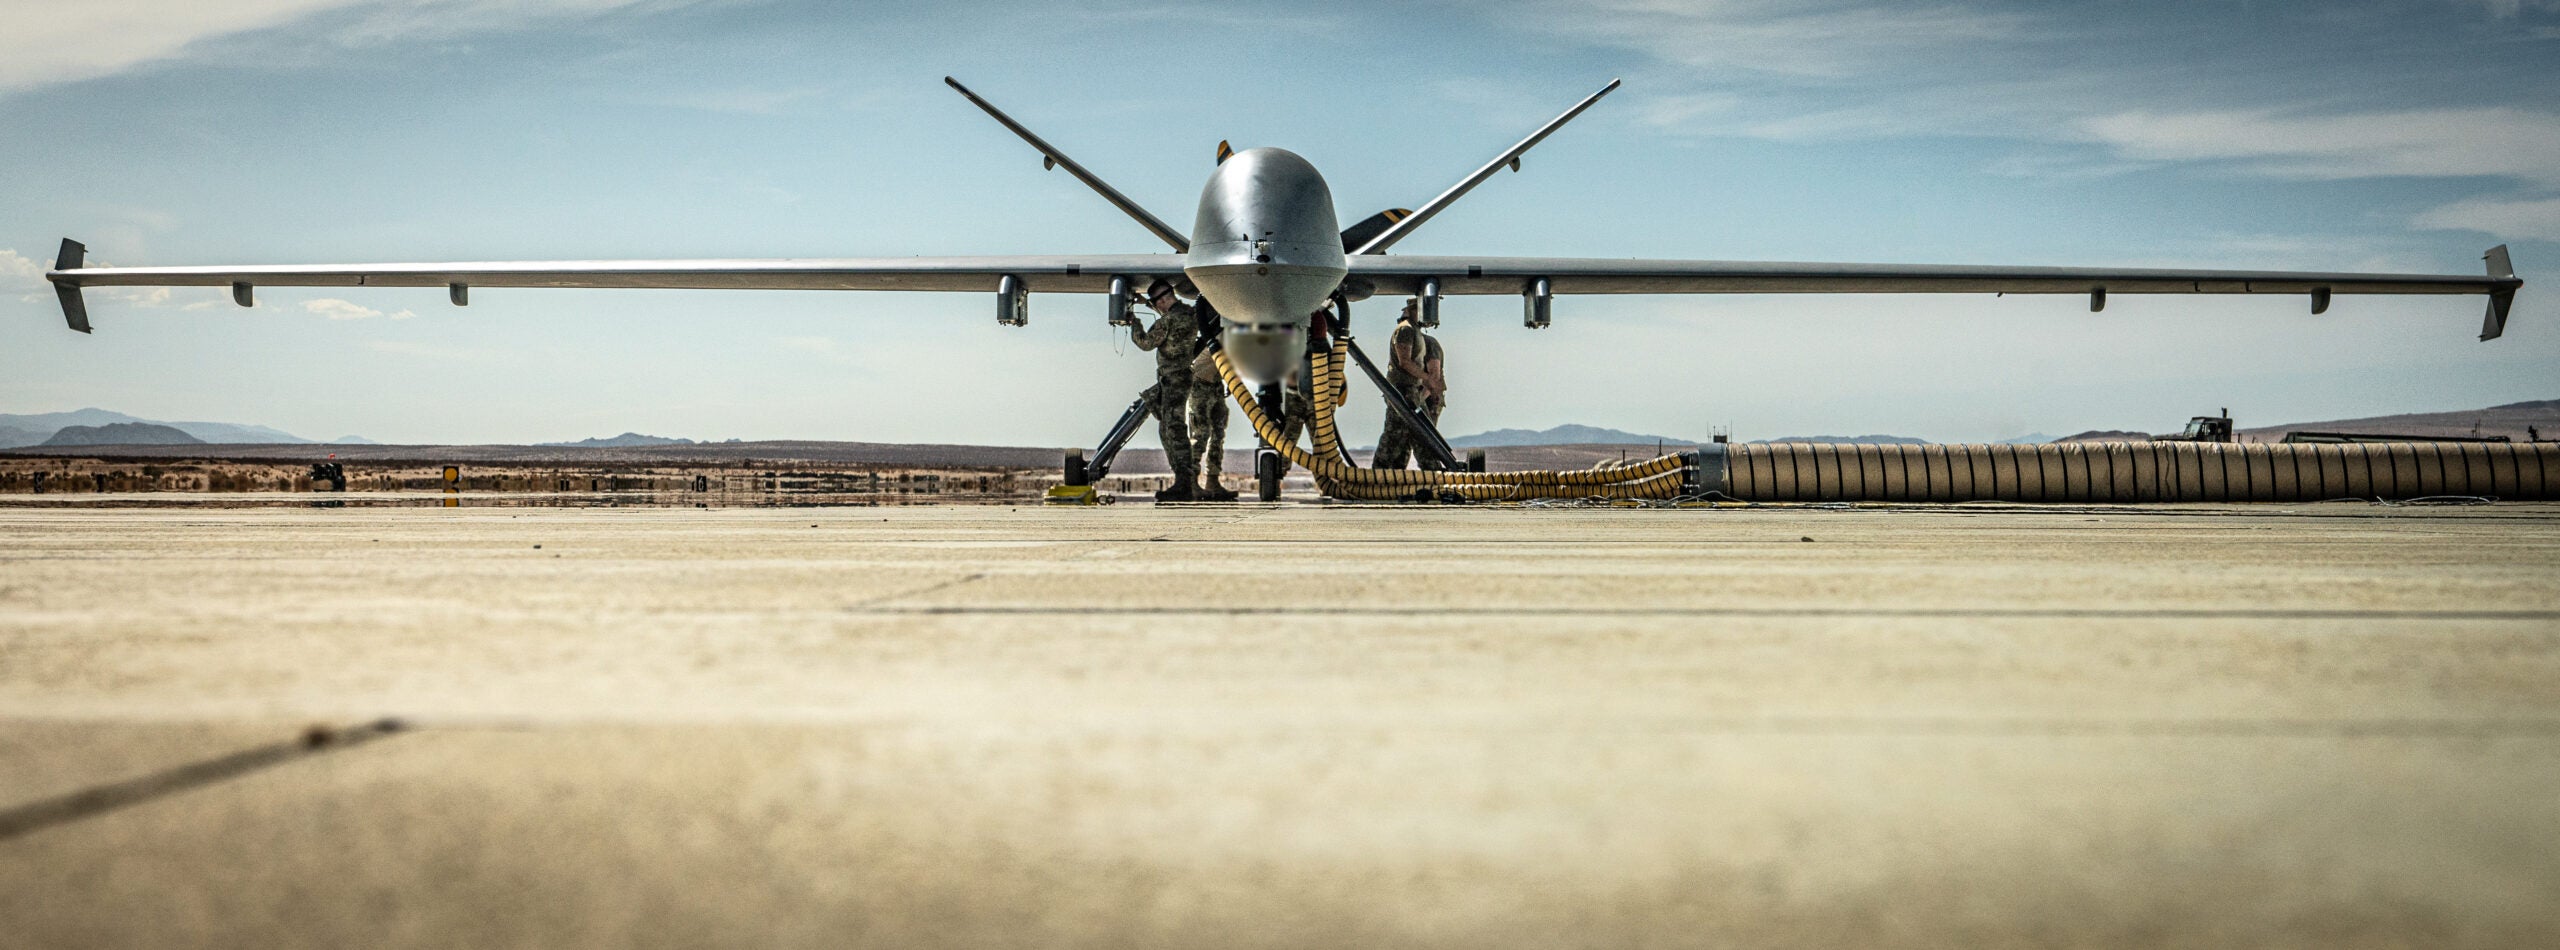 A U.S. Air Force MQ-9 Reaper with the 163rd Attack Wing, California Air National Guard, refuels during Integrated Training Exercise (ITX) 4-22 at Marine Corps Air-Ground Combat Center, Twentynine Palms, Calif., on July 20th, 2022. The MQ-9 Reaper received fuel via aviation delivered ground refueling from an MV-22 Osprey with Marine Medium Tiltrotor Squadron 764, marking the first time the MQ-9 received fuel from a joint asset and the first time an Air National Guard MQ-9 received fuel from another aircraft. The MQ-9 Reaper provided close air support to Marine Air-Ground Task Force 23 during its execution of the fire support coordination exercise of ITX as the Marine Corps Reserve continues to work to integrate with sister services in preparation for future operations. (U.S. Marine Corps photo by. Sgt. Matthew Teutsch)



This photo has been altered for security purposes